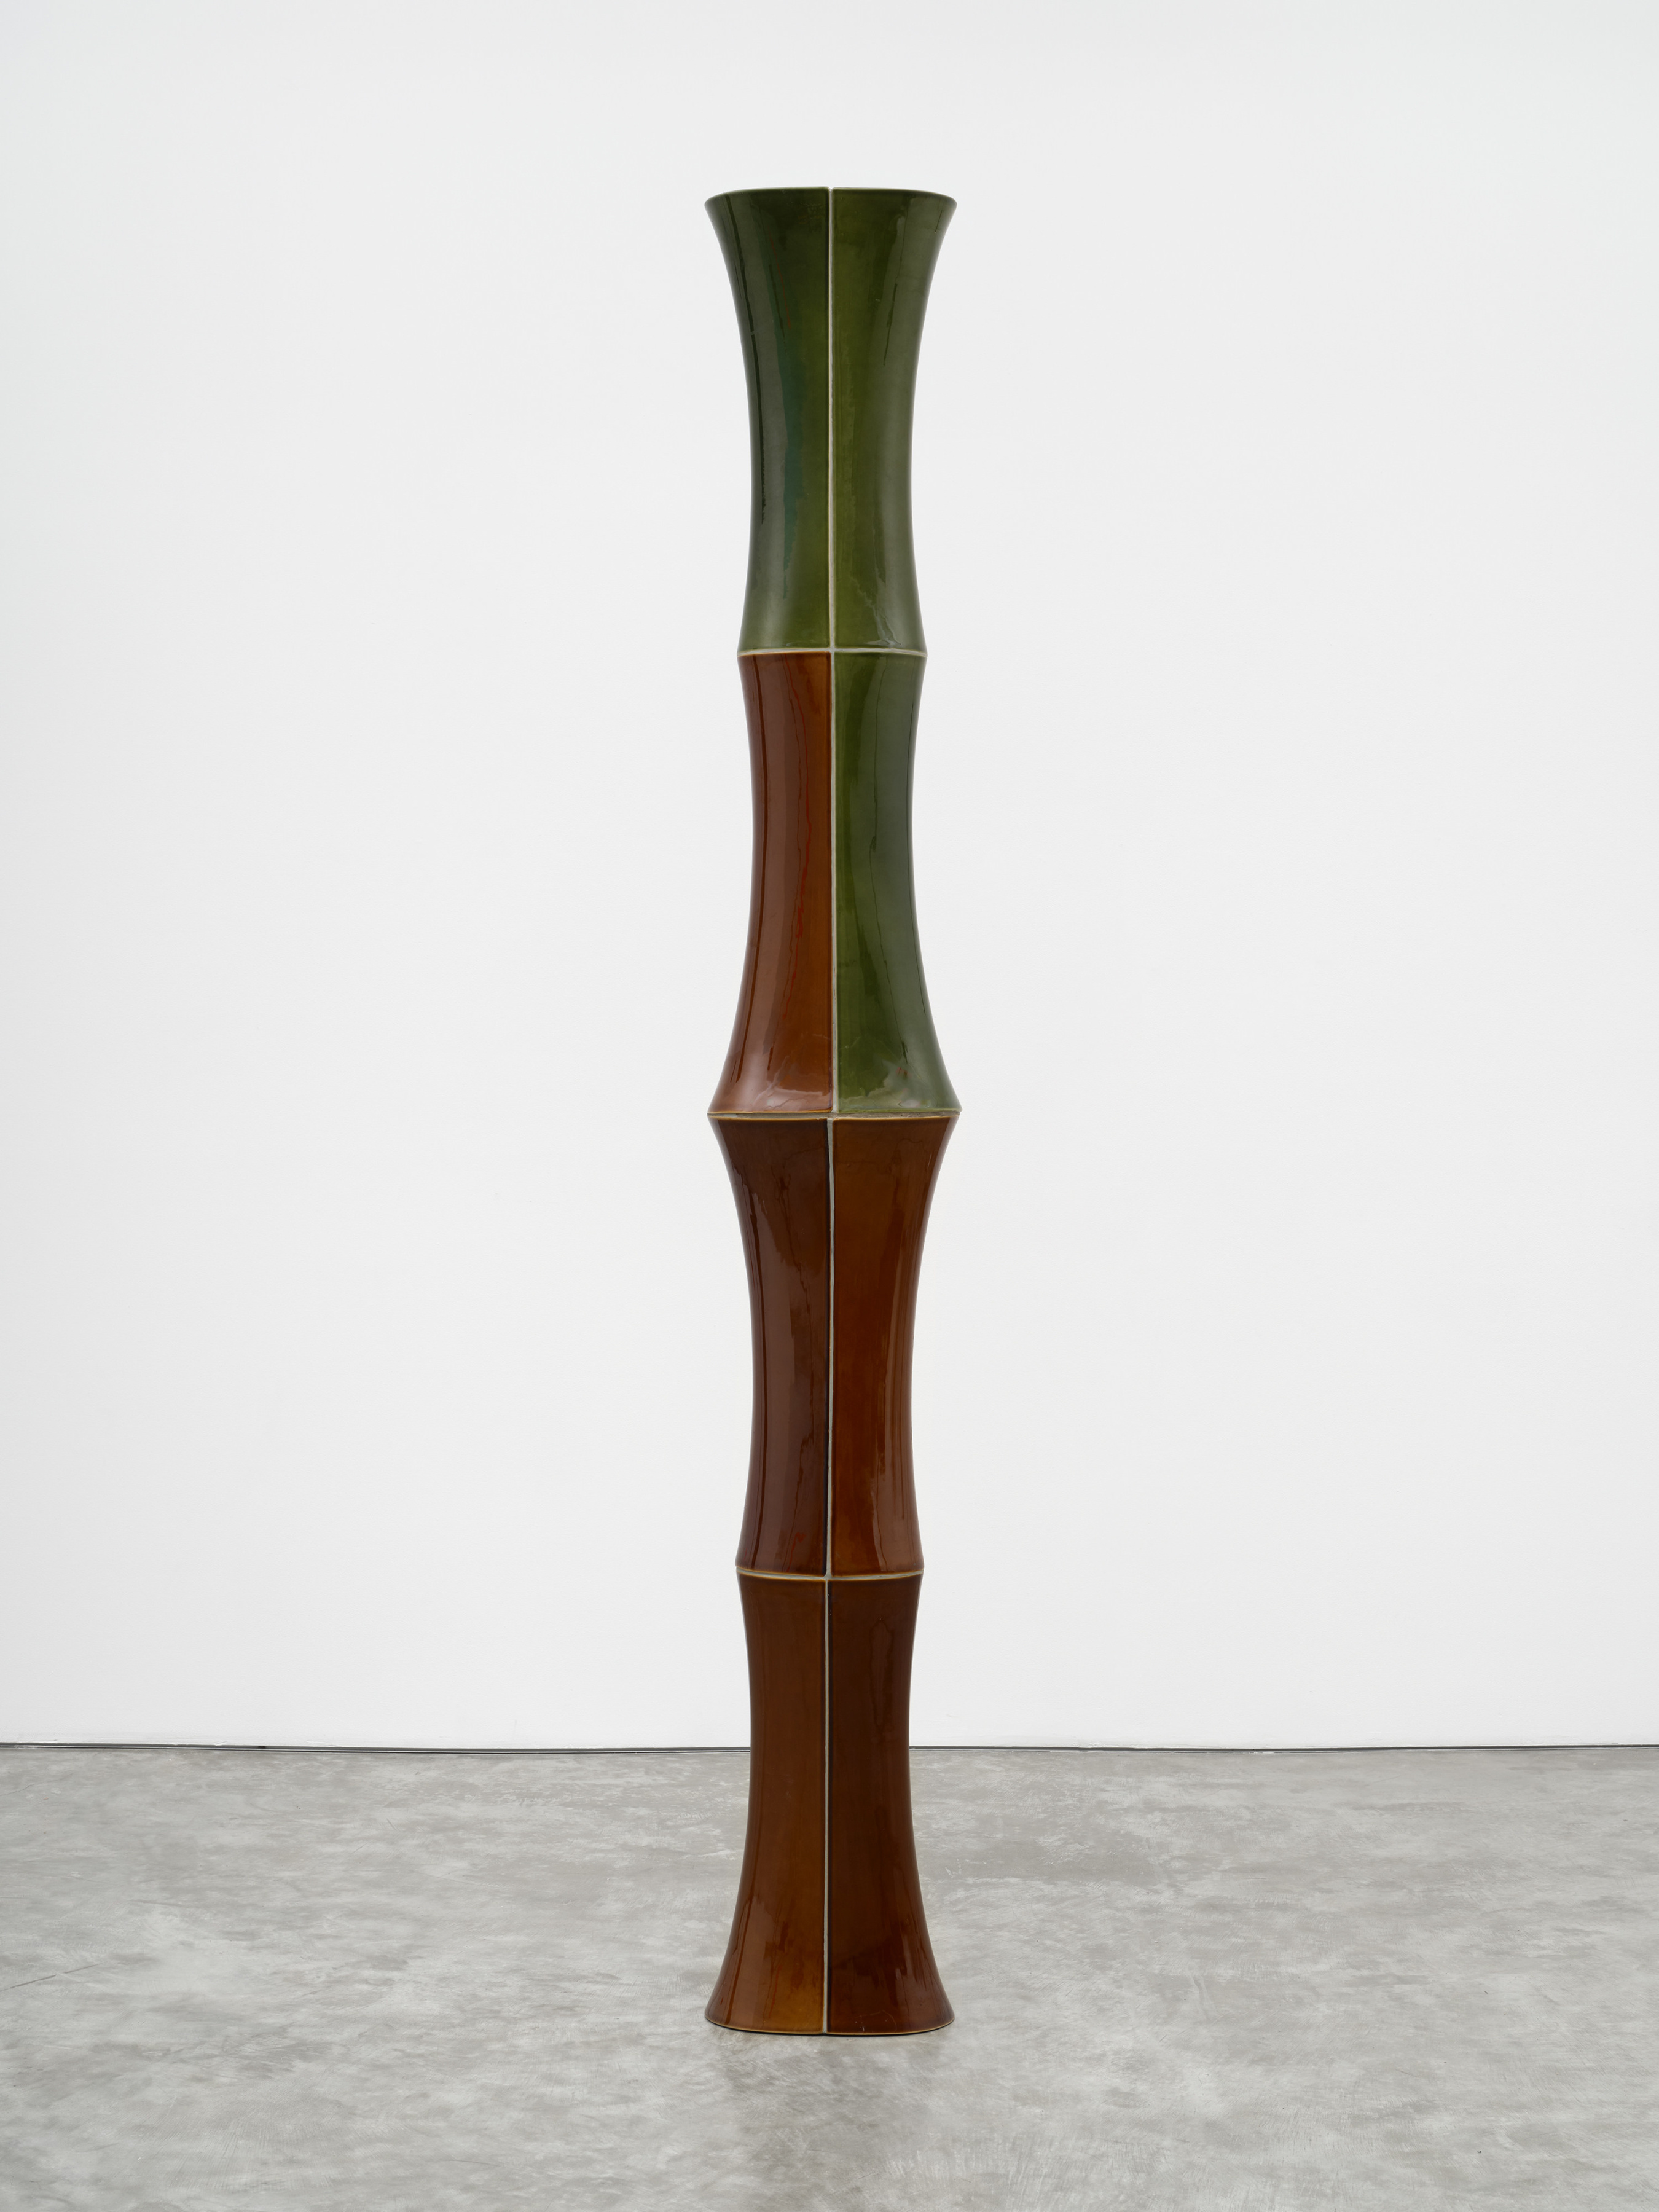 A freestanding ceramic sculpture with green and brown composite sloping parts. 